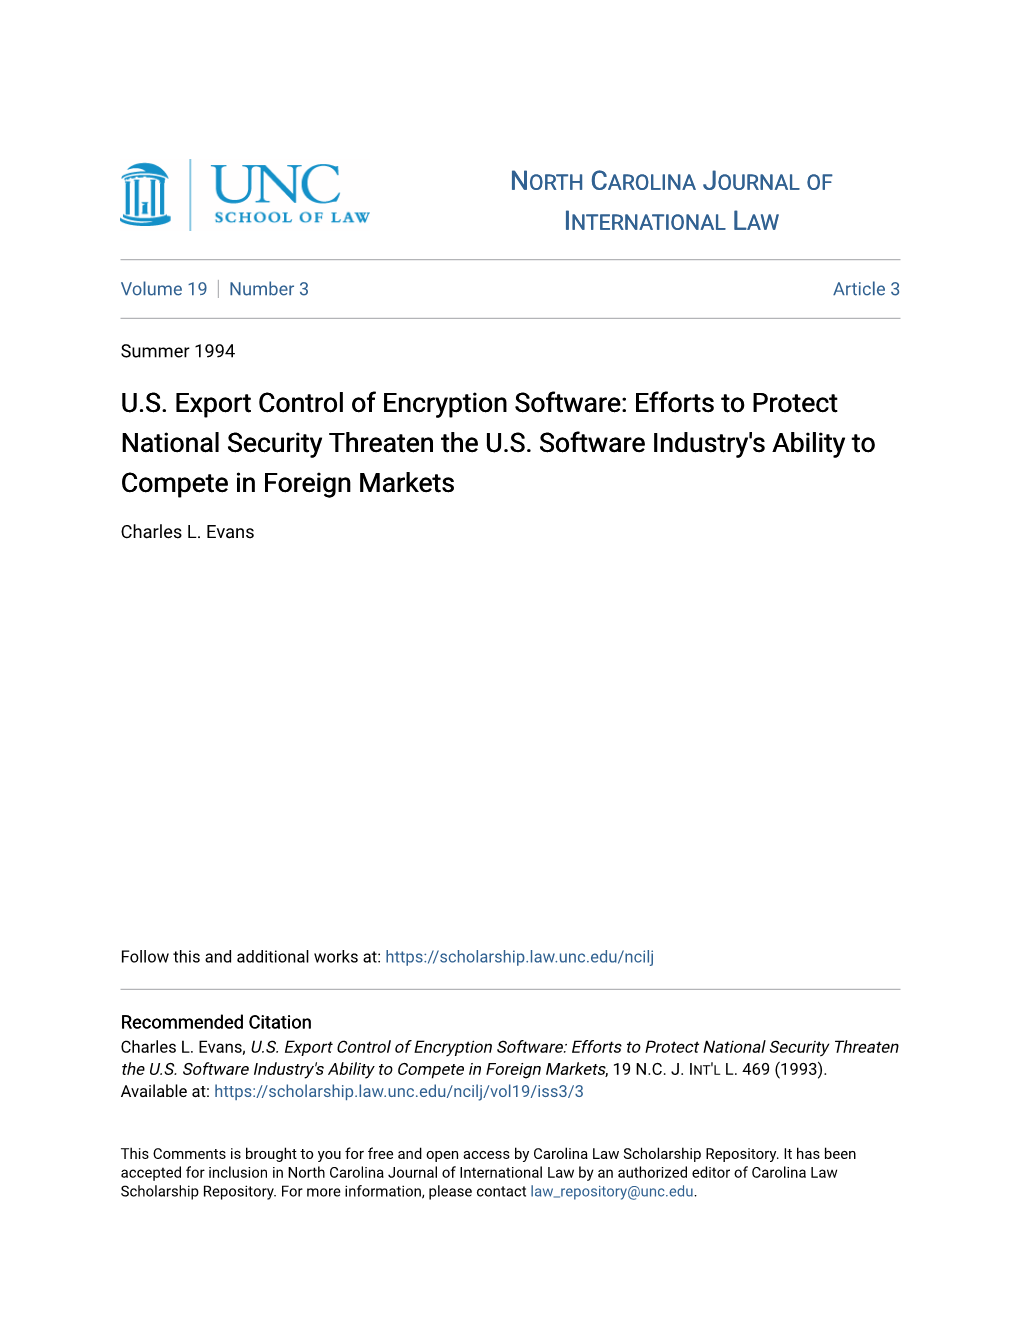 US Export Control of Encryption Software